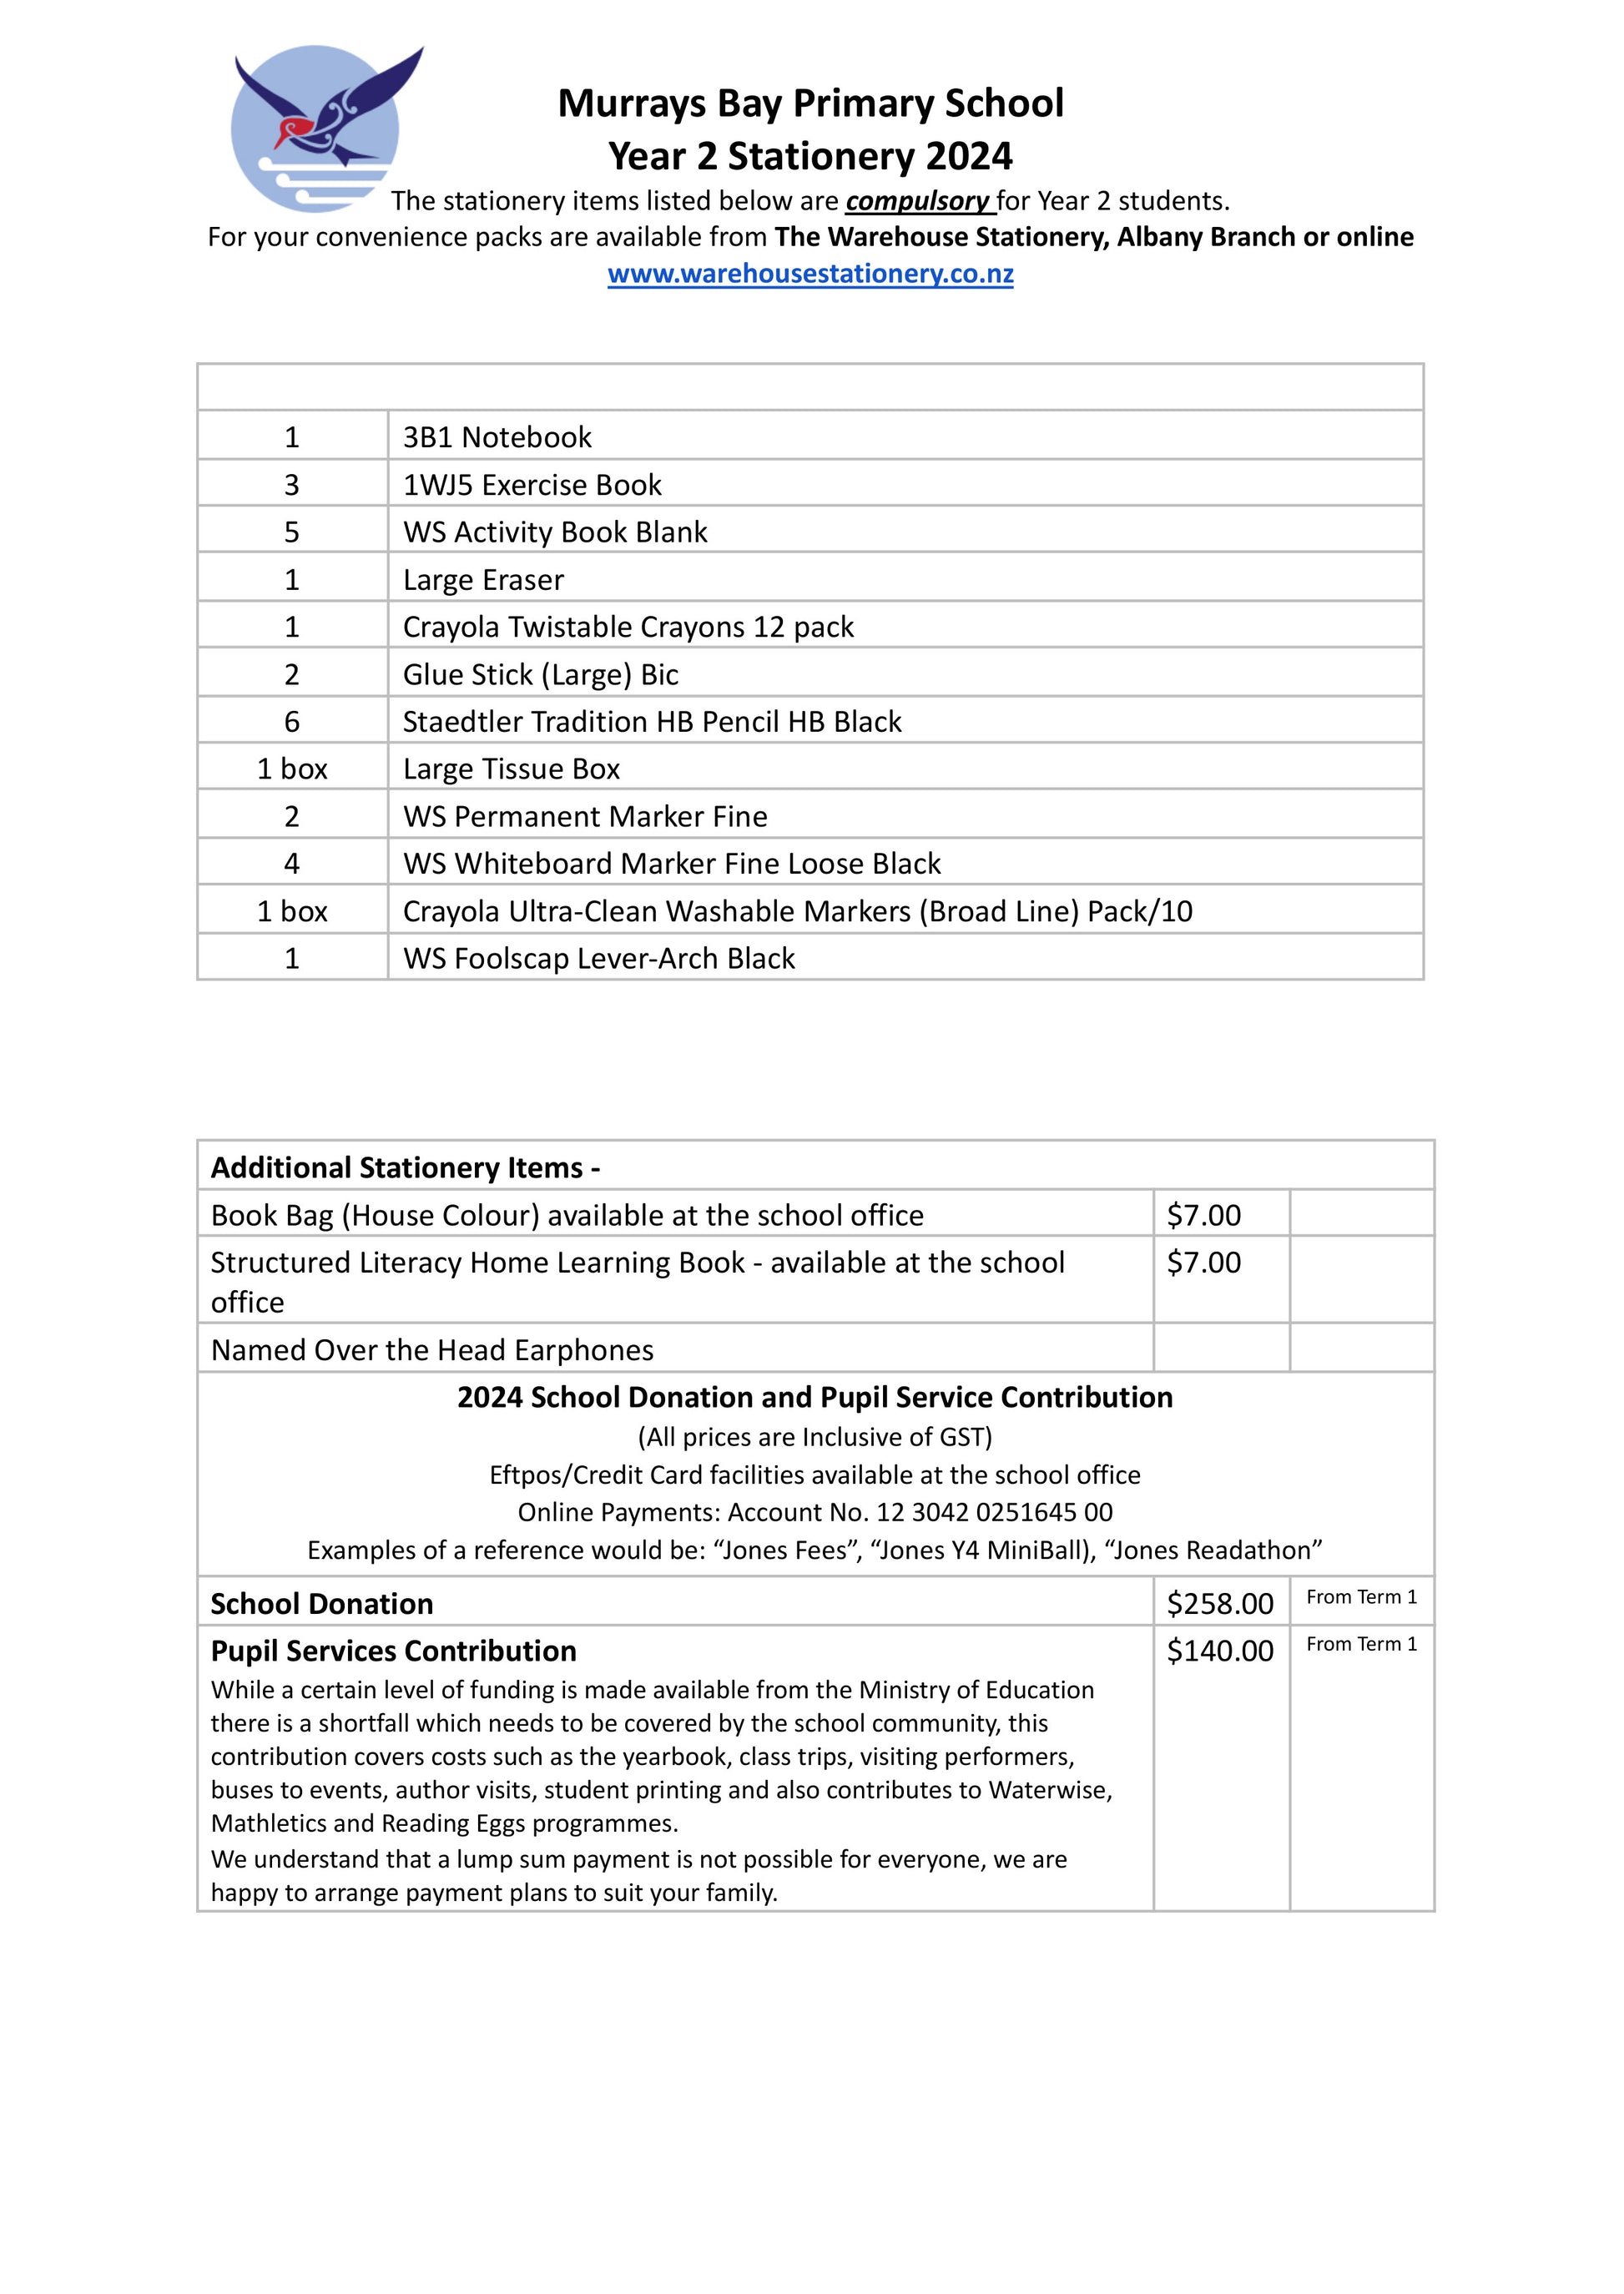 Murrays Bay Primary School Stationery Pack 2024 Year 2